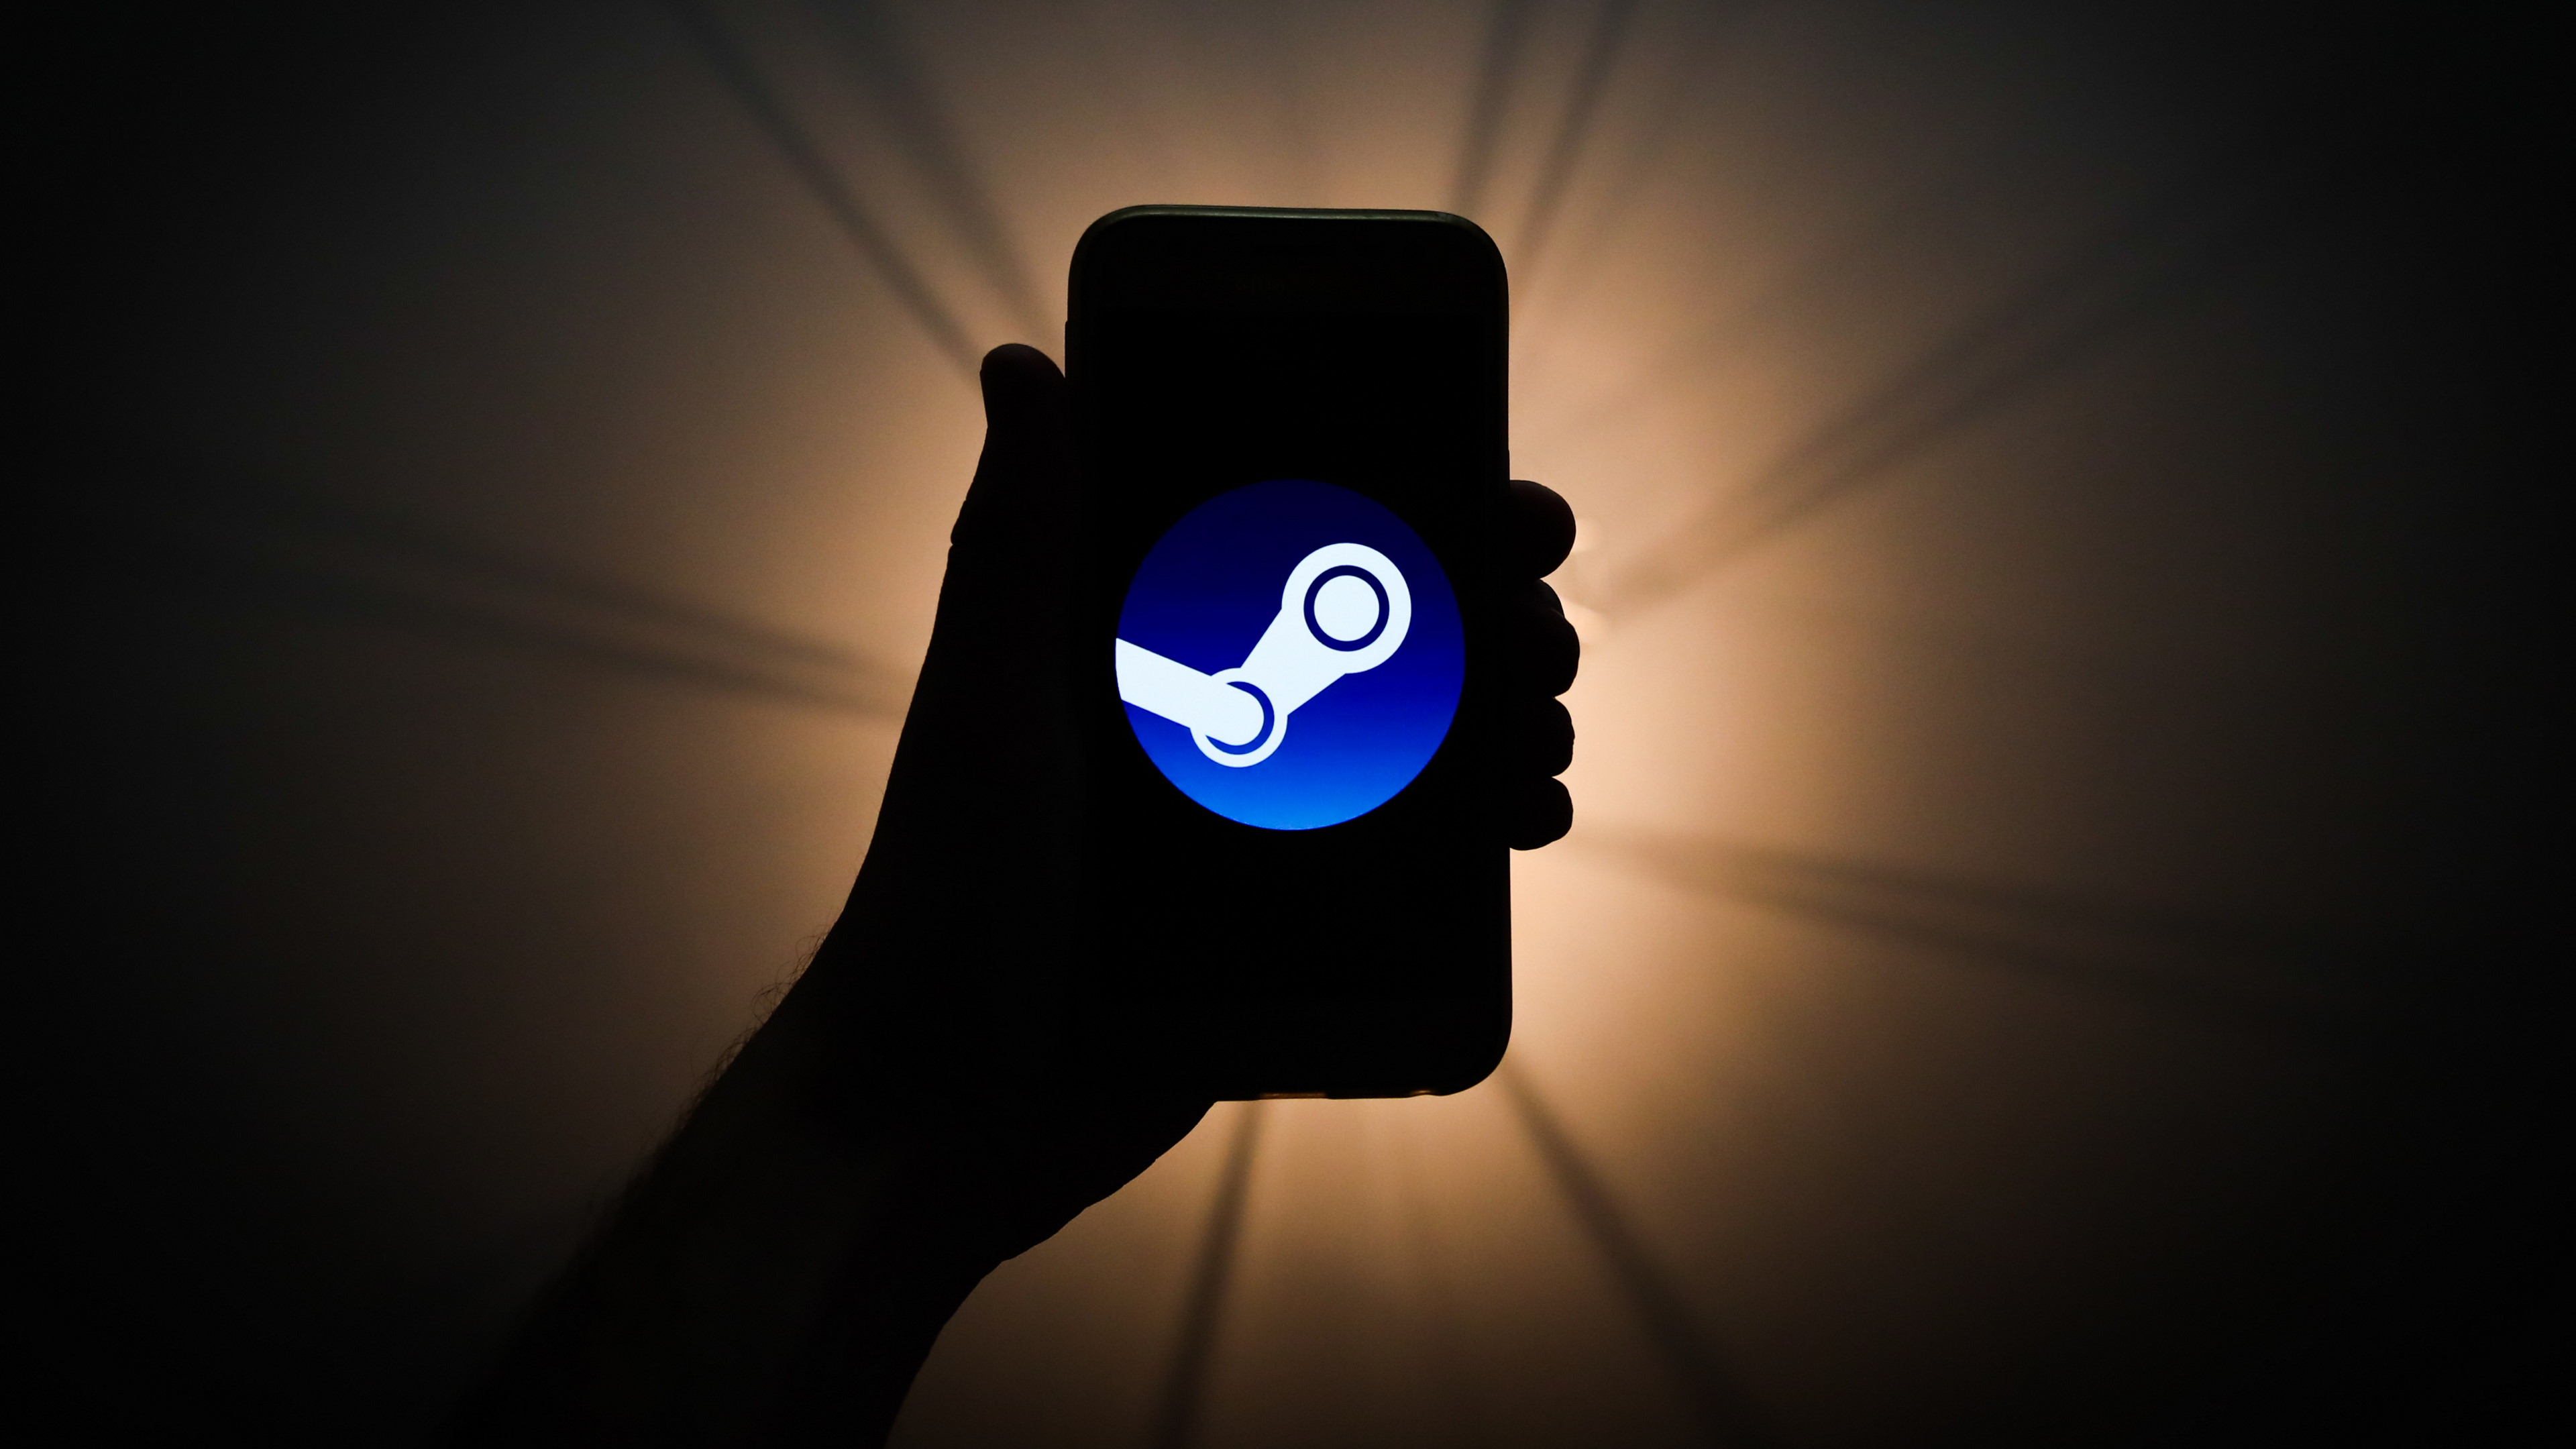 Steam Prices In Argentina Increase By 500%